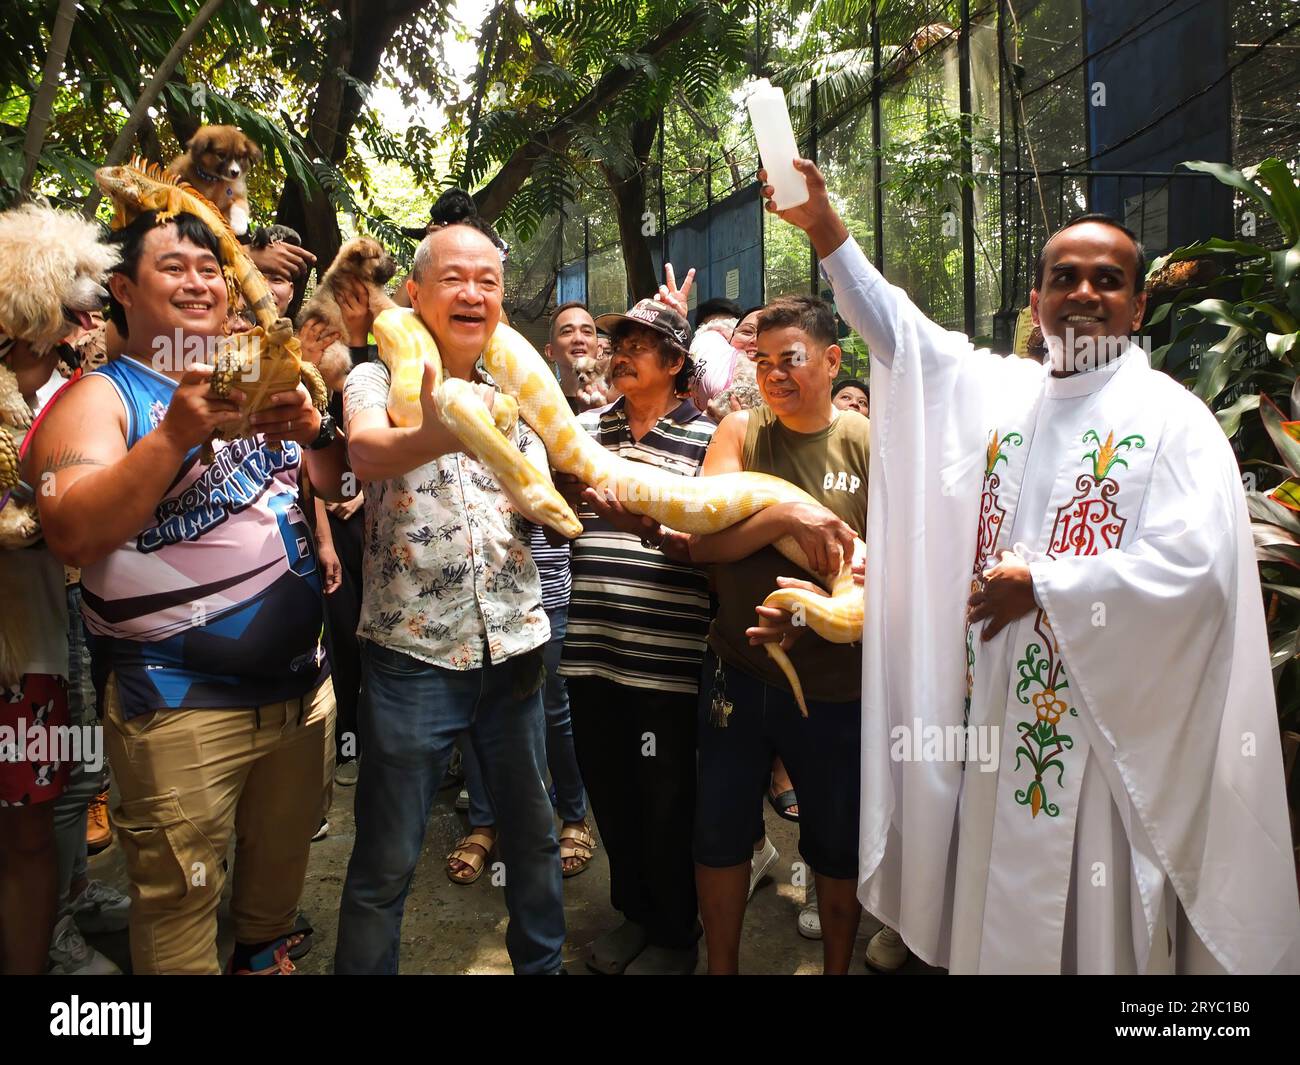 Malabon, Philippines. 30th Sep, 2023. Manny Tangco the founder of Malabon Zoo together with other pet owners carry their favorite pets during the pet blessing. Pet lovers and owners flock to Malabon Zoo to celebrate World Animal Day and Feast Day of St. Francis of Assisi, patron saint of animals. Led by Manny Tangco, founder of Malabon Zoo. He presents to media people, students & pet owners 'Sir George' the white lion cub, and 'Cheesecake', an albino Burmese python. They also conduct pet blessing & free anti-rabies vaccination to pets. Credit: SOPA Images Limited/Alamy Live News Stock Photo